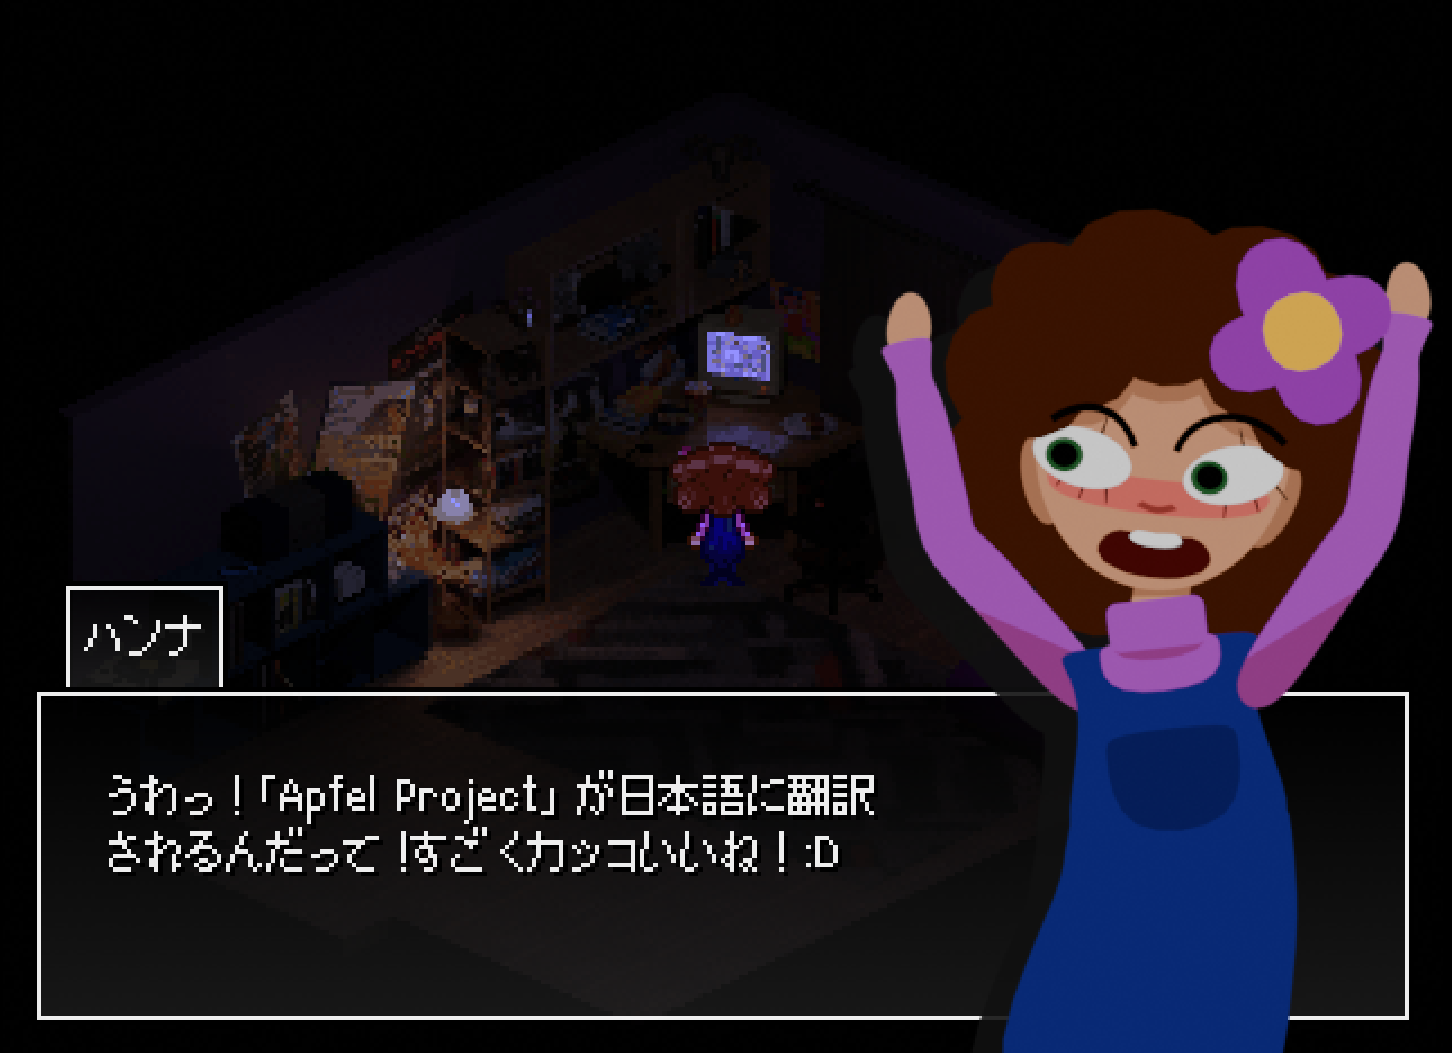 Ocram: 'Apfel Project DEMO will also be translated to Japanese! (And maybe Spanish and German)'